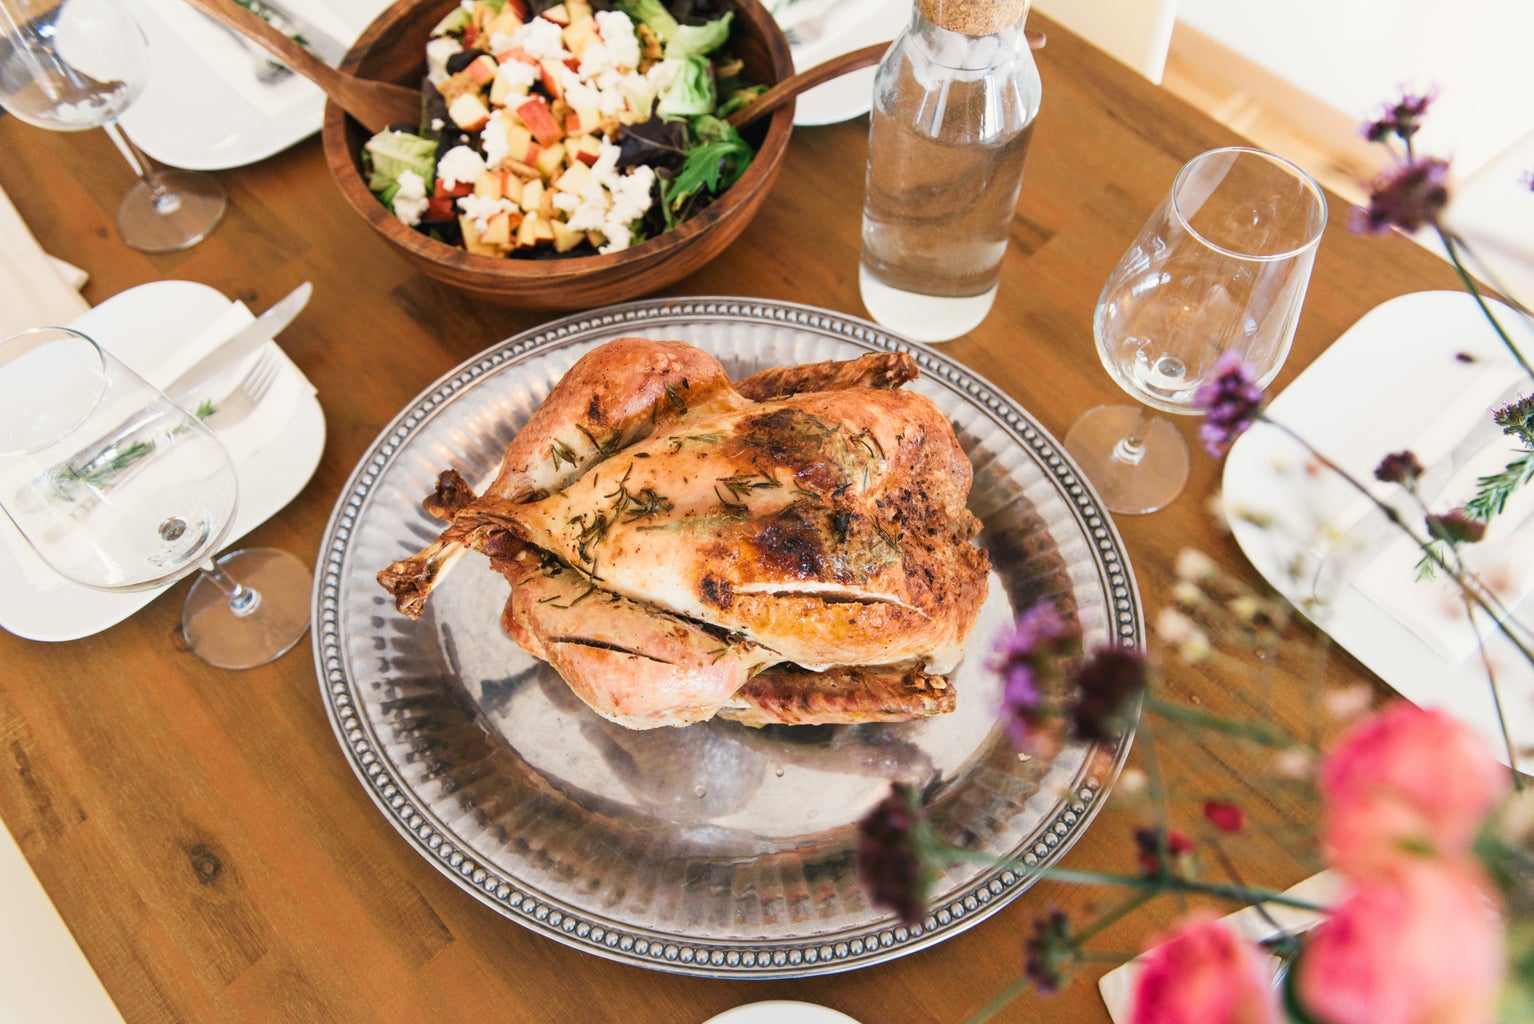 roasted chicken on a wooden table with sides and place settings